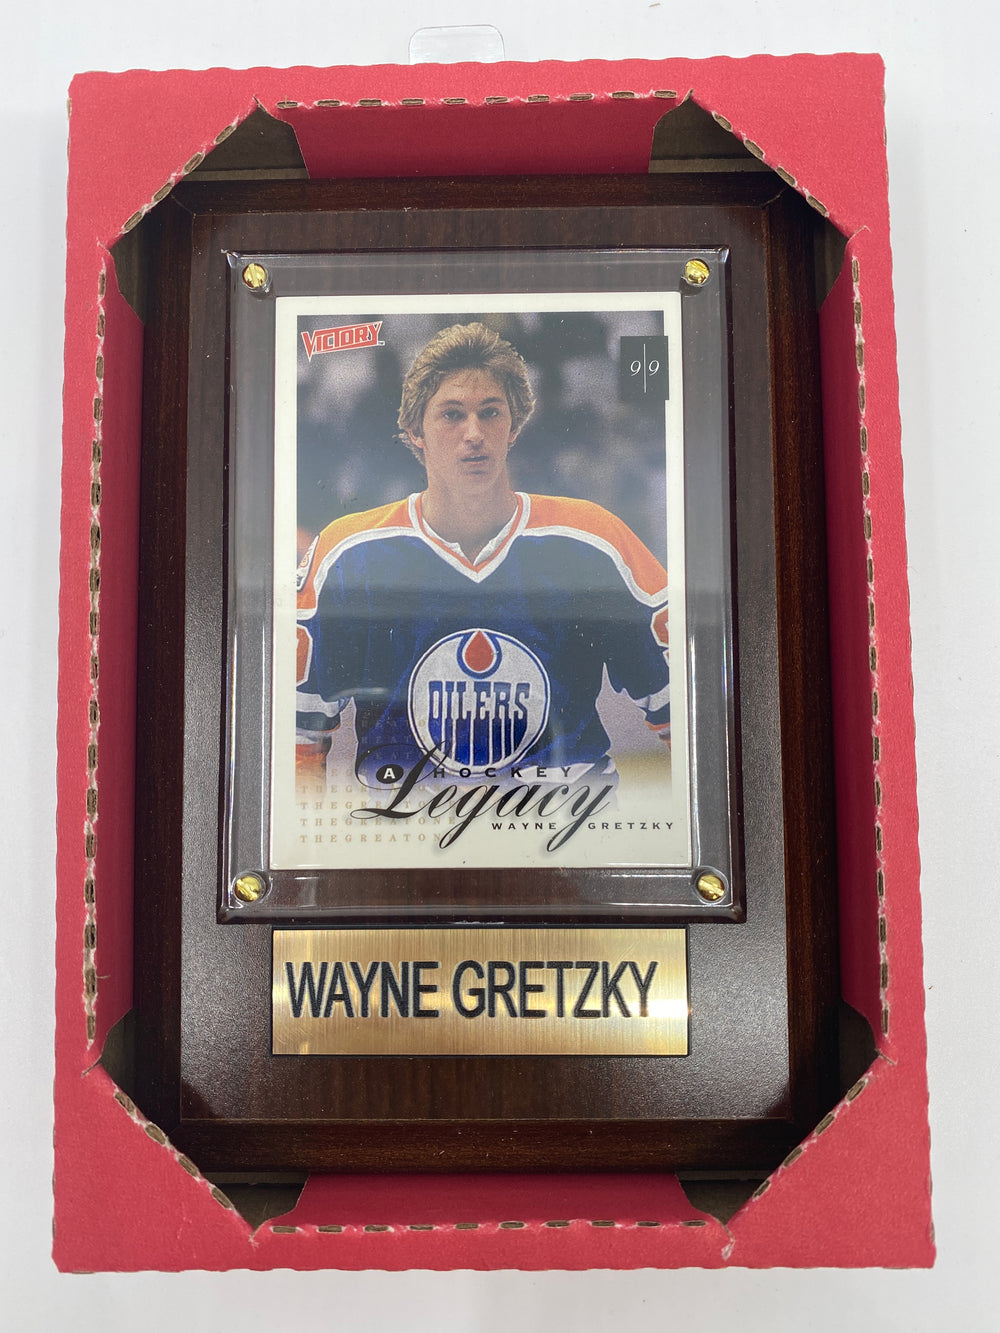 NHL Plaque with card 4x6 Oilers Wayne Gretzky